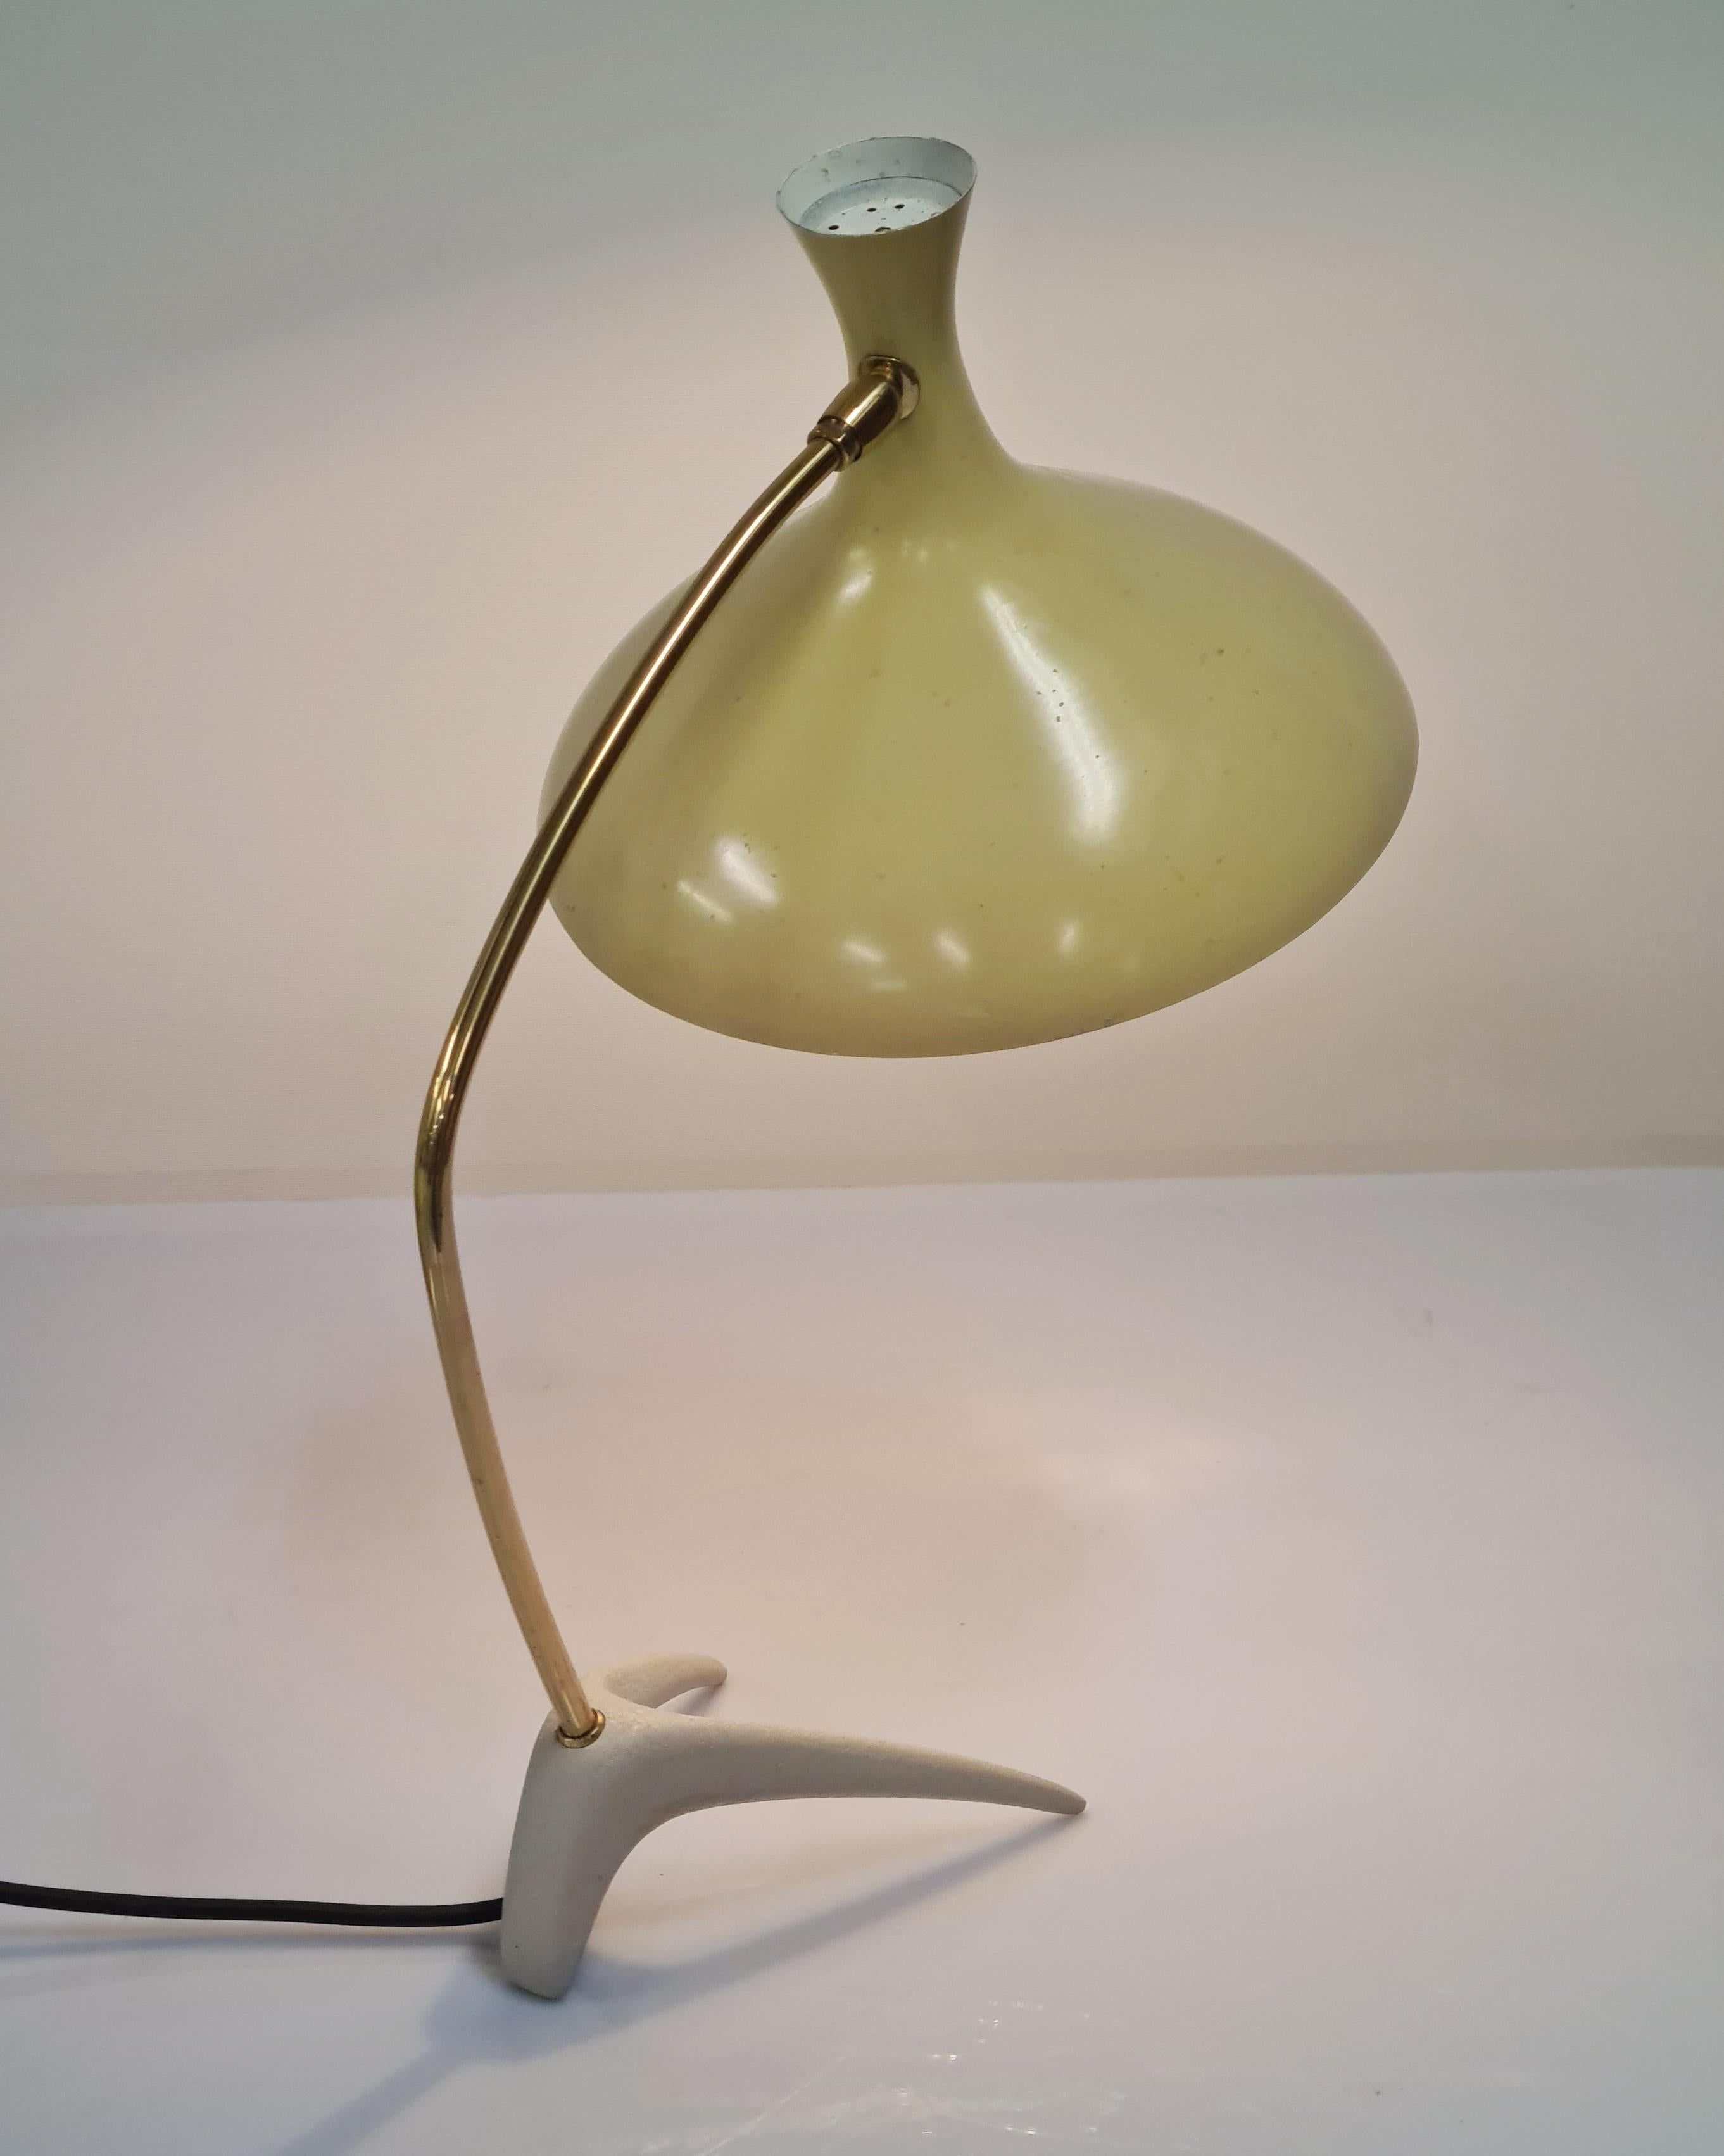 A beautiful sleek lamp by Karl-Heinz Kinsky for Cosack with the crowfoot base. The lamp is in beautiful original and vintage condition except for the changed wirings. The shade is adjustable and makes it perfect for writing desks and working spaces